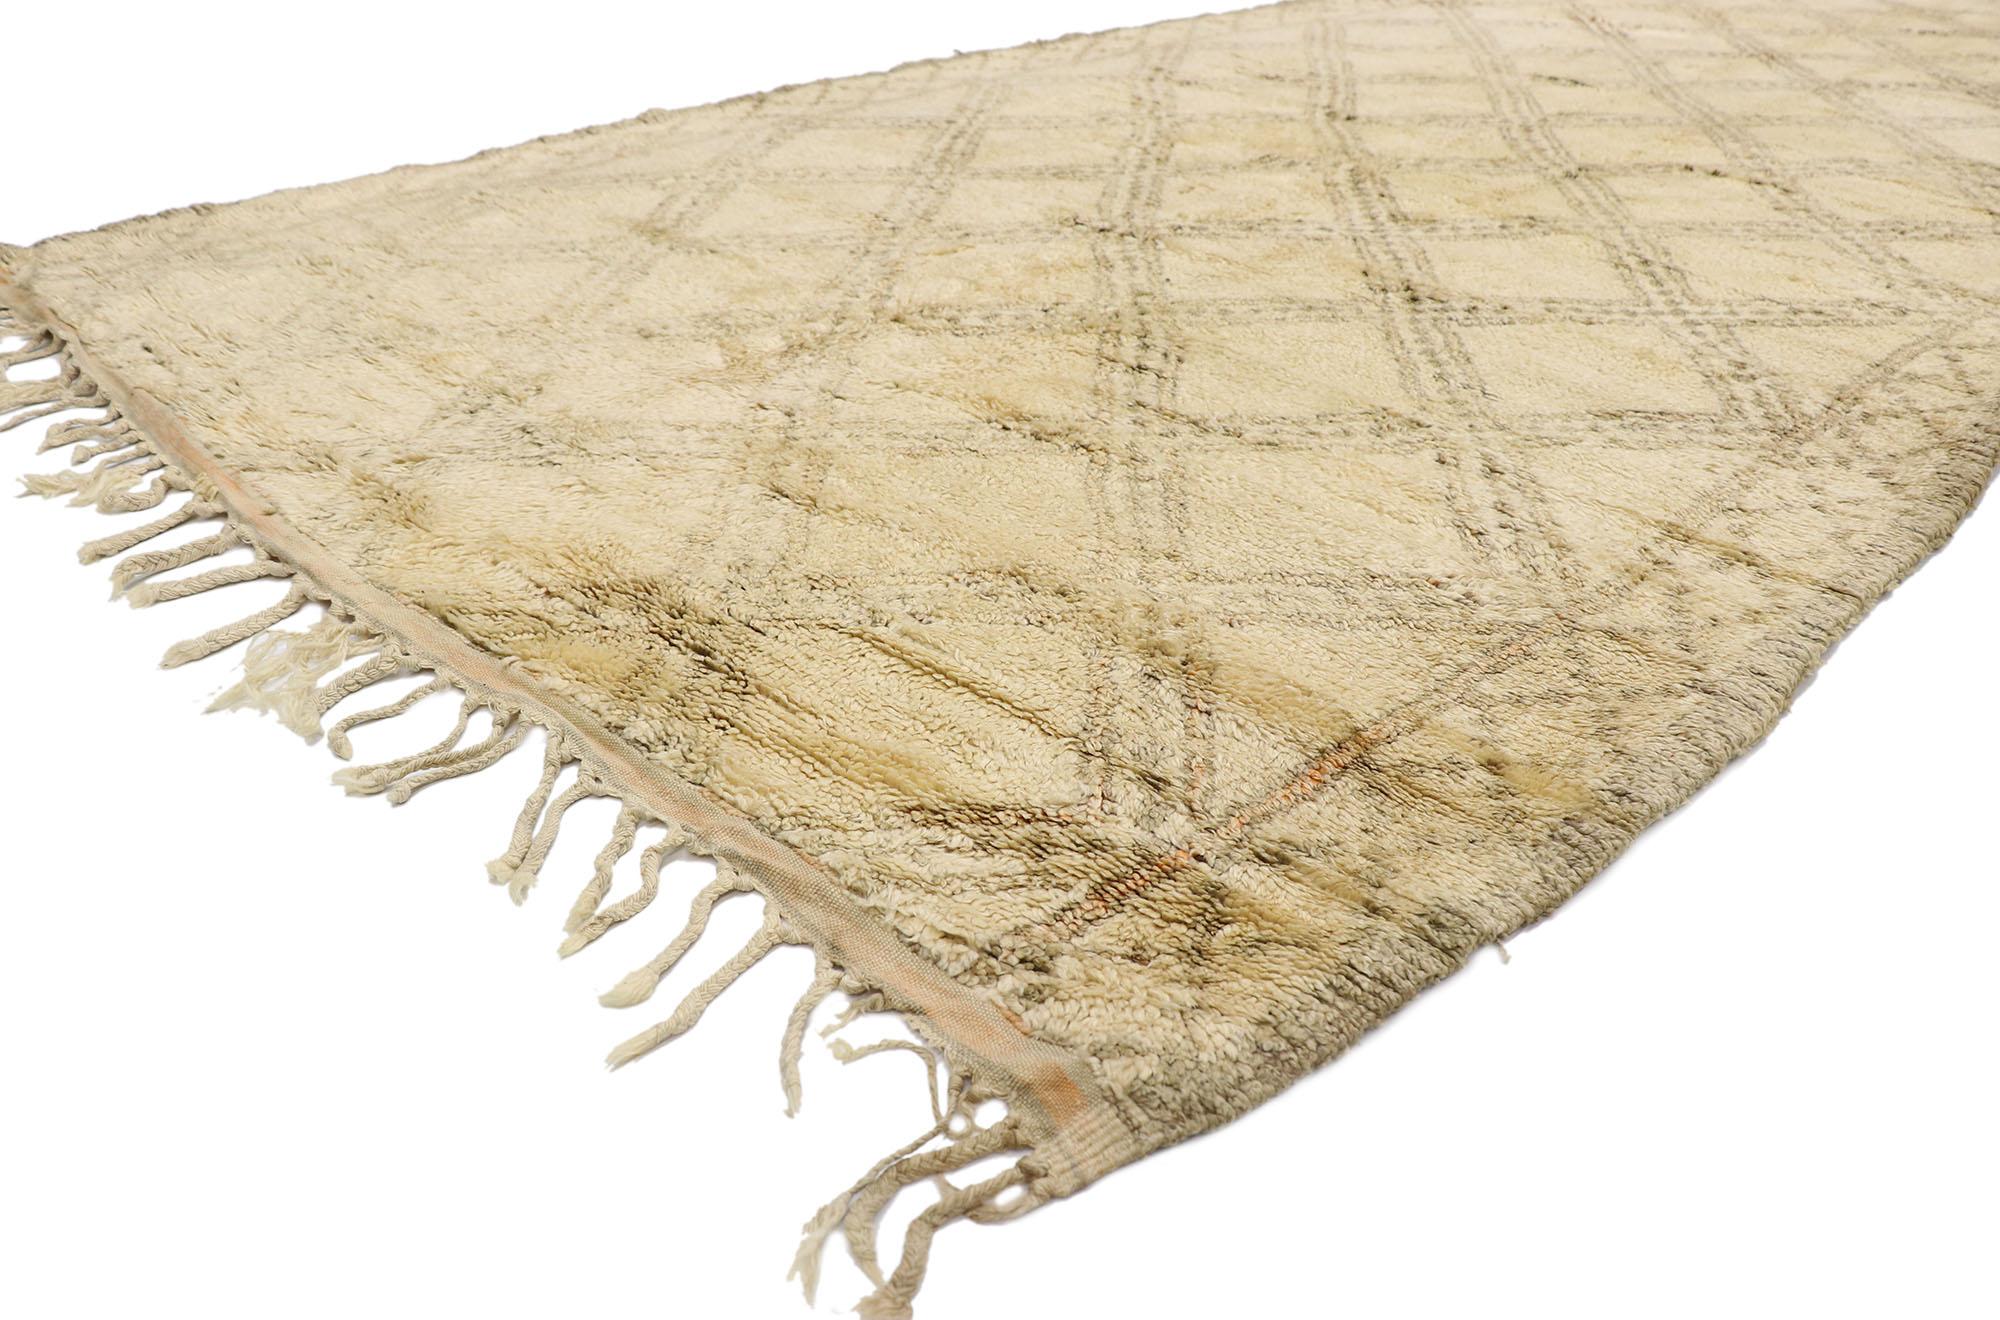 21415 Vintage Moroccan Beni Ourain Rug, 06'03 x 13'08. 
Minimalist Shibui meets Hygge in this hand knotted wool vintage Moroccan Beni Ourain rug. The detail lozenge lattice and earthy neutral colors woven into this piece work together to provide a